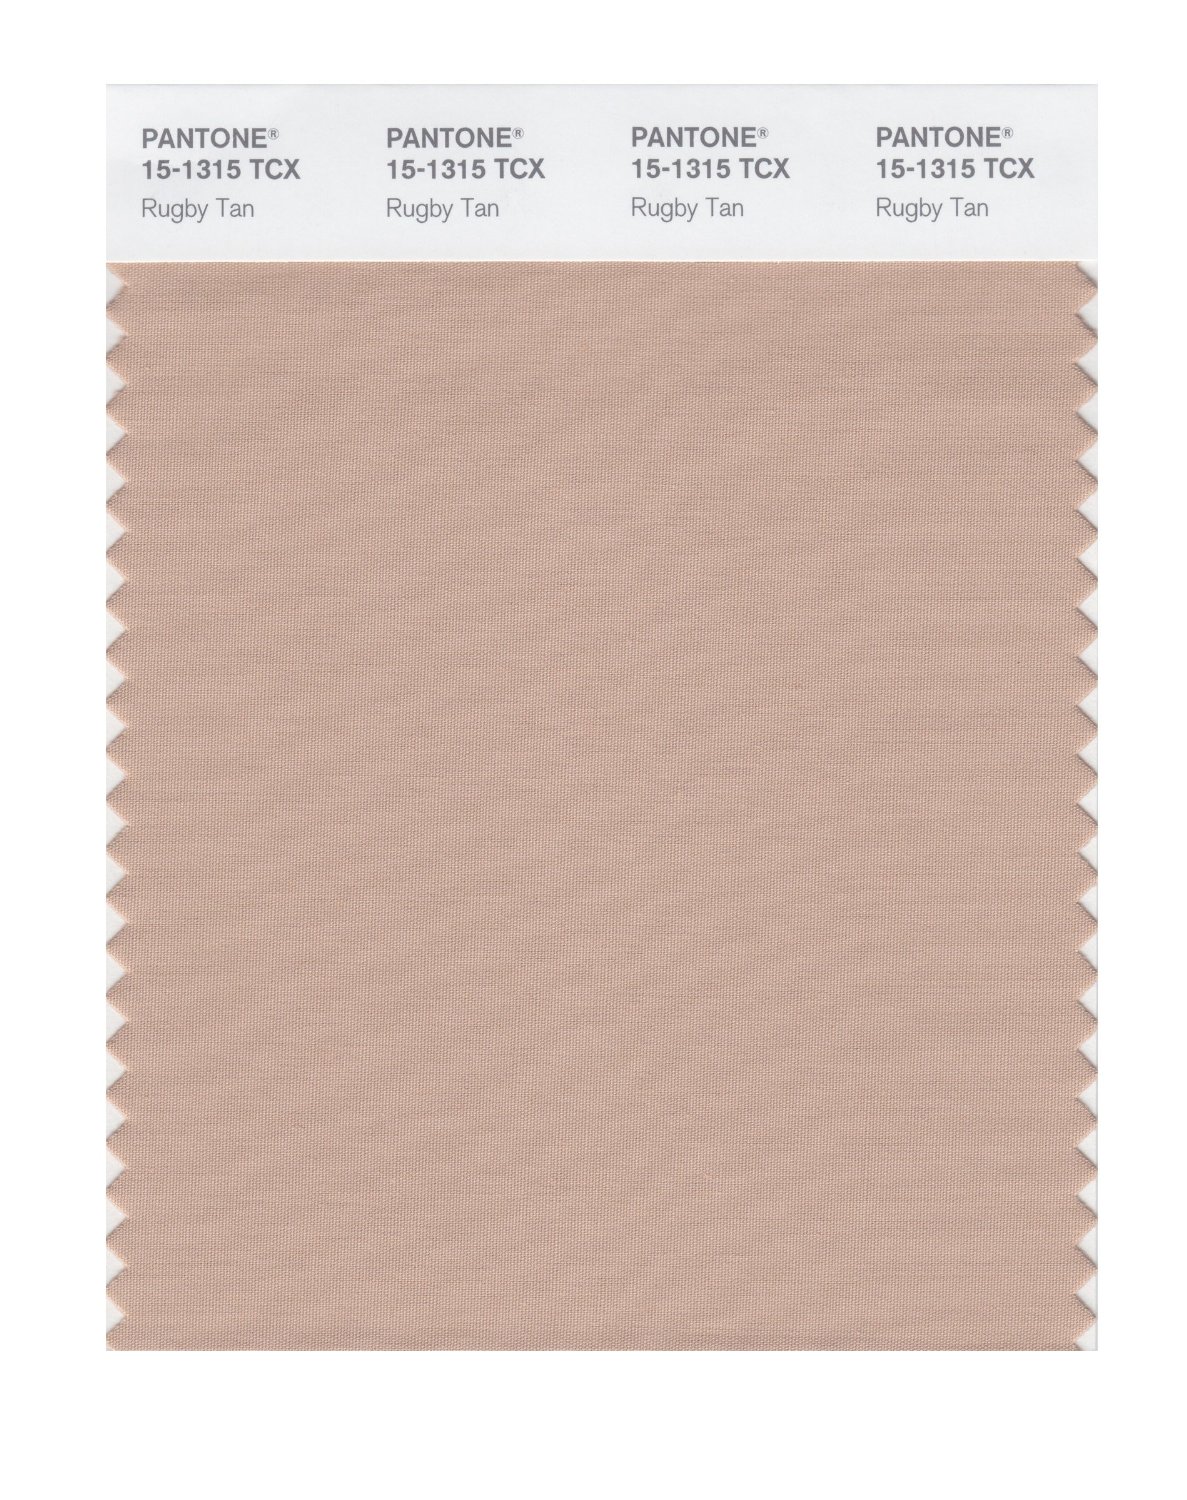 Pantone Cotton Swatch 15-1315 Rugby Tan